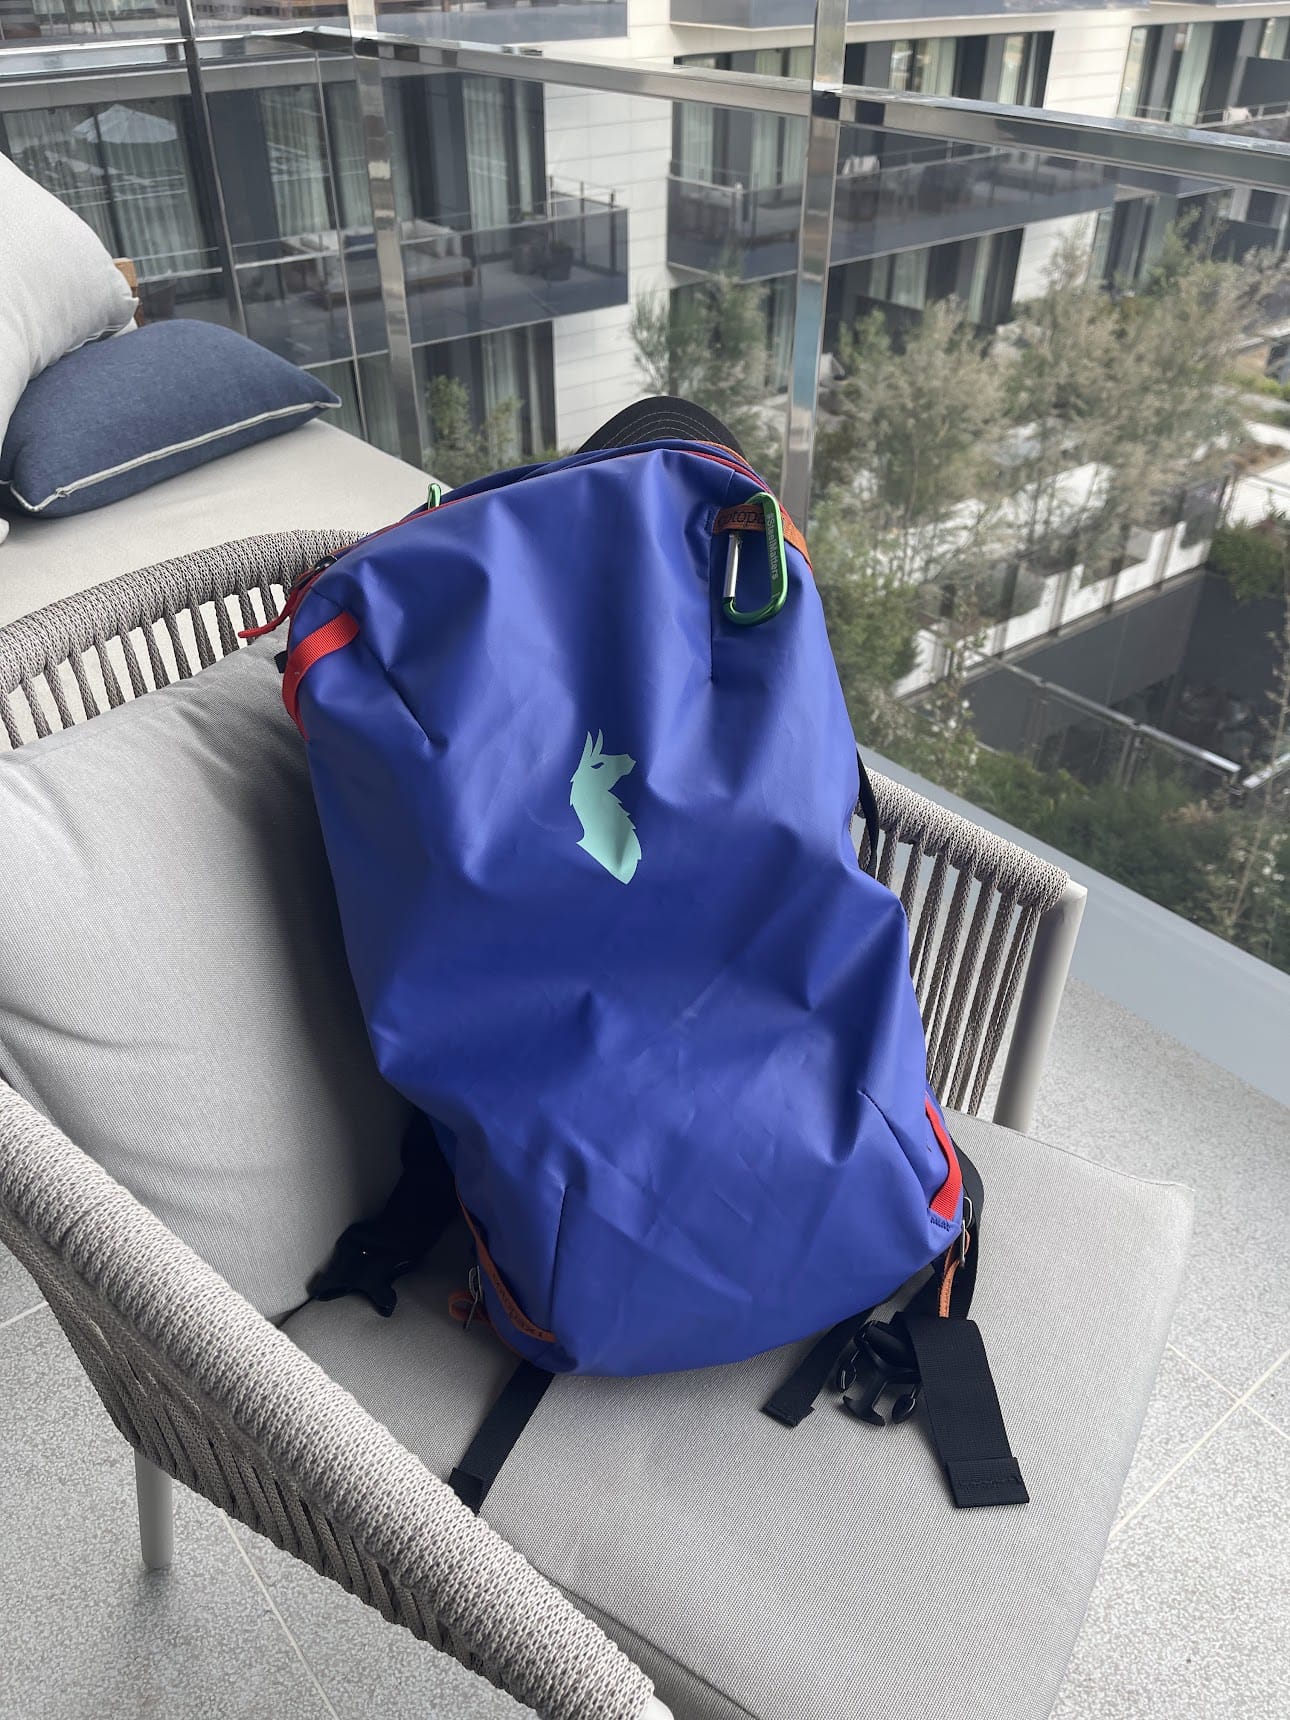 Cotopaxi bag in chair